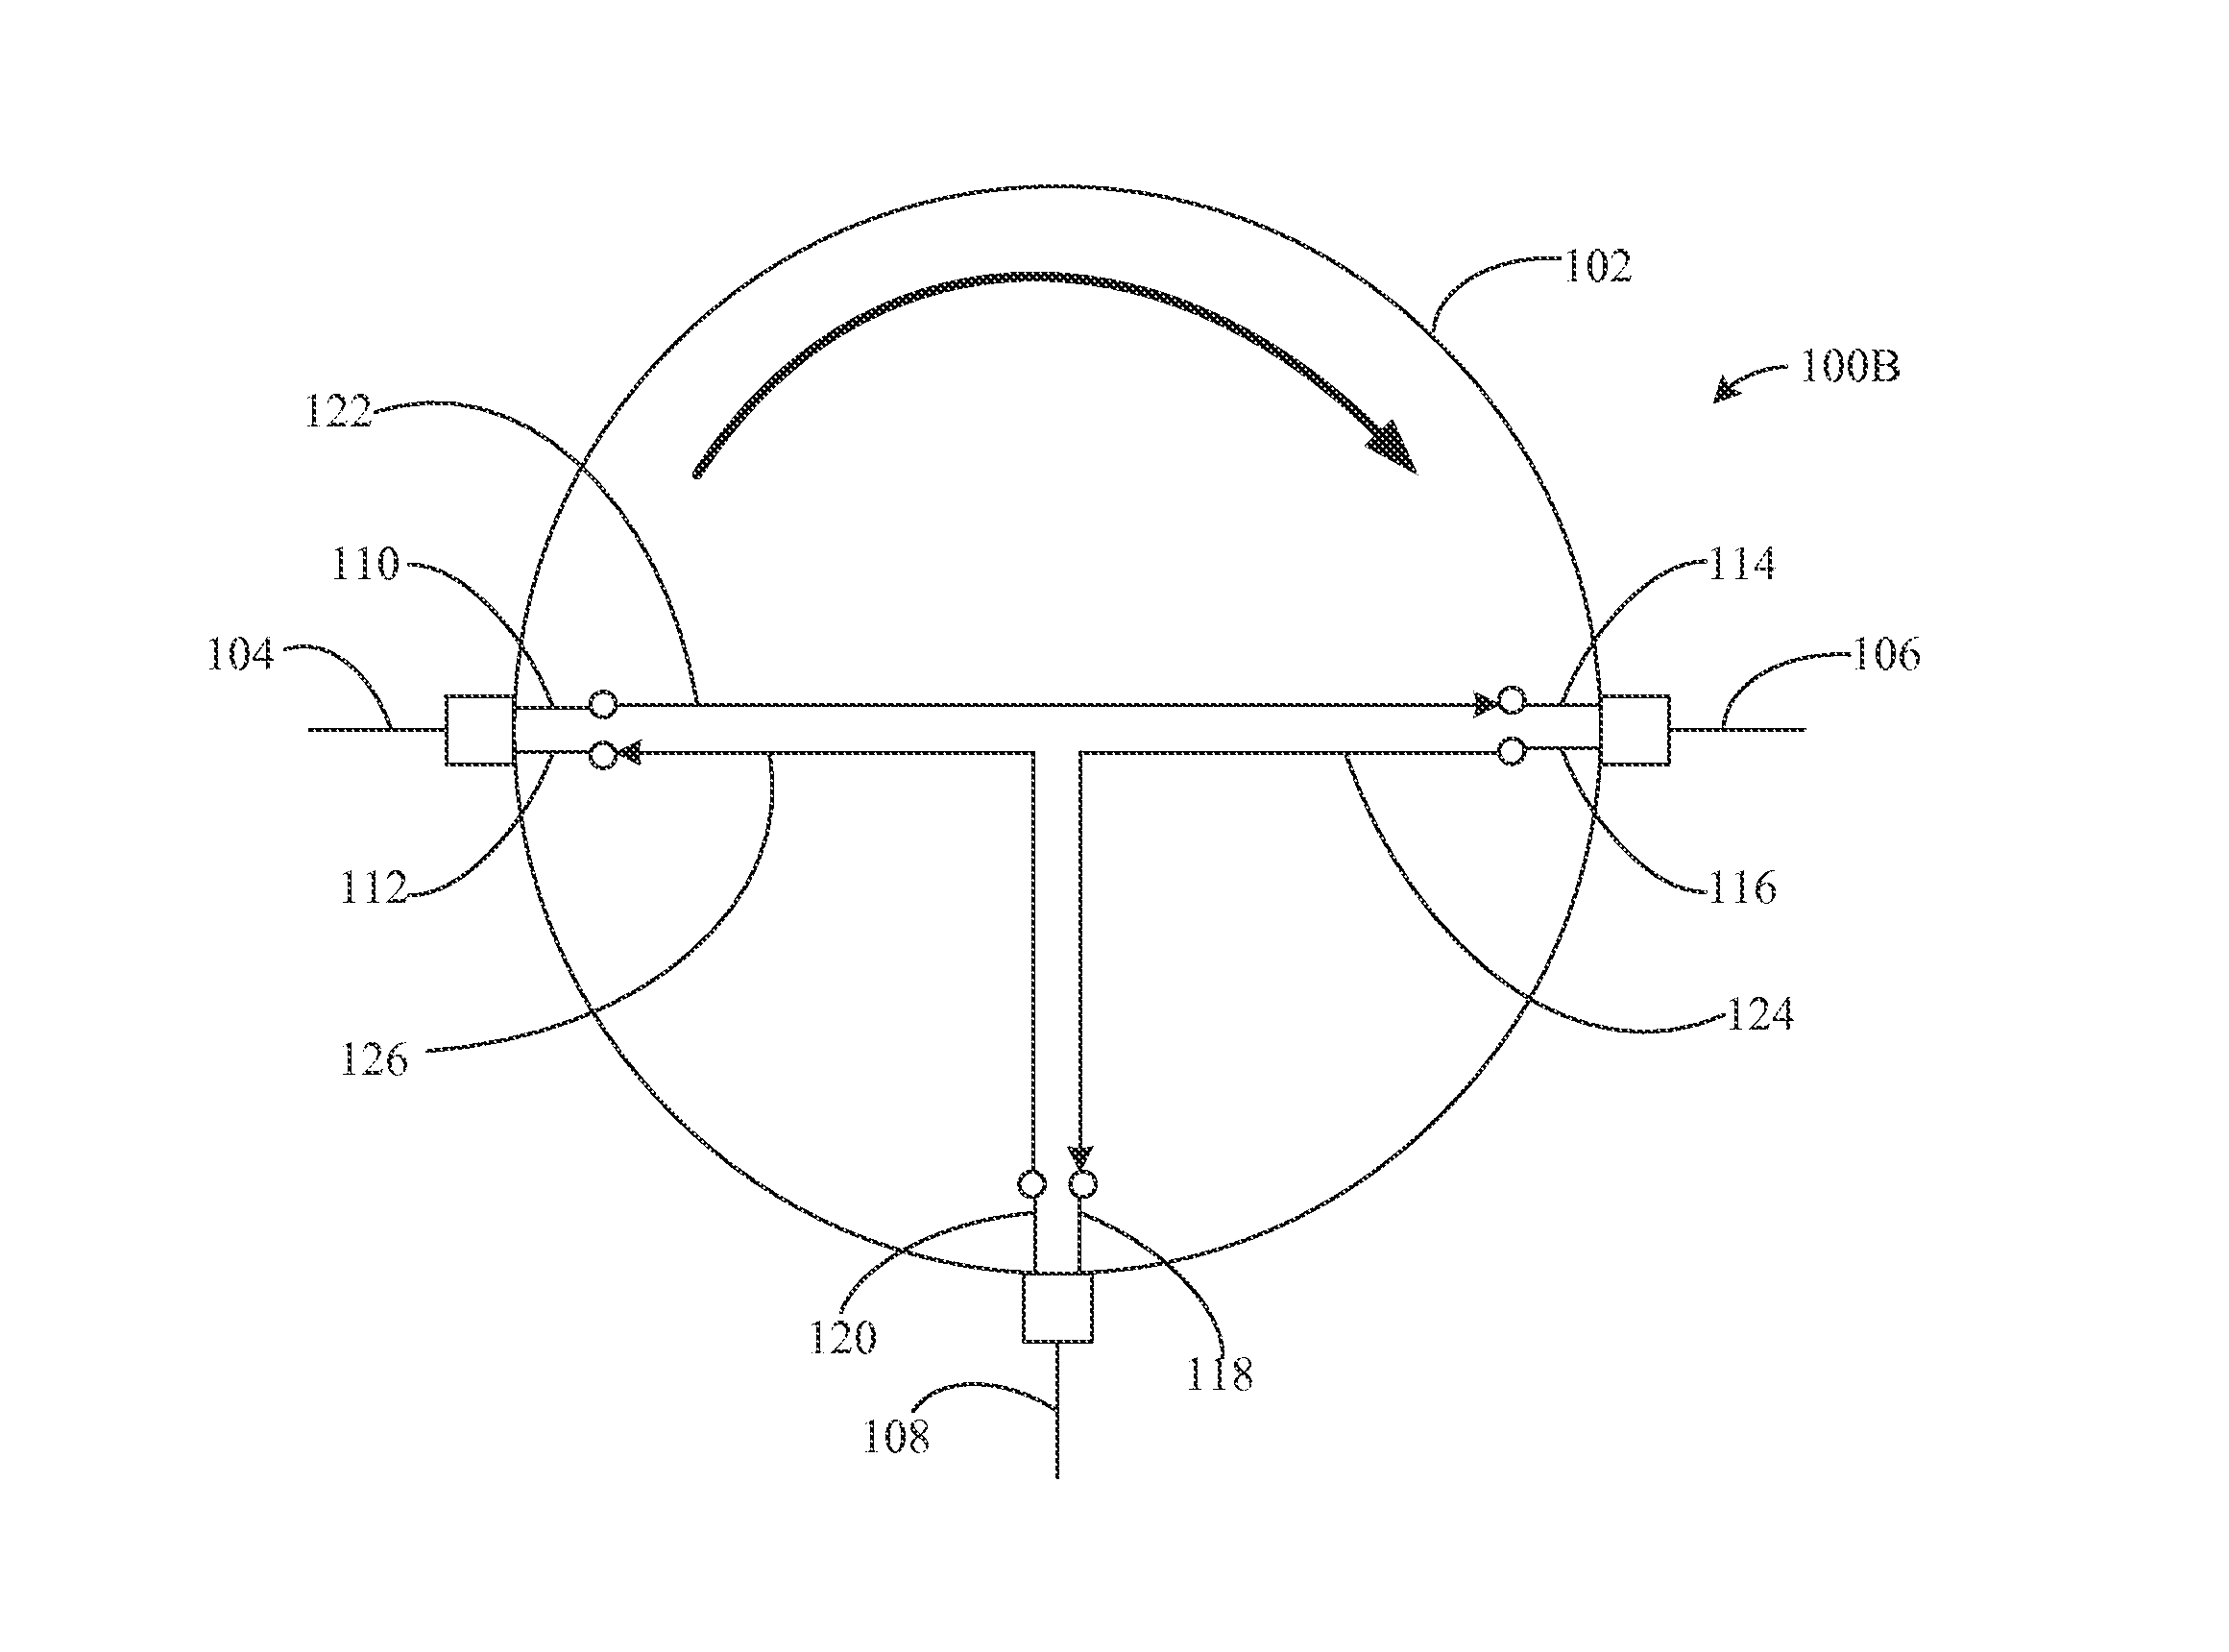 Mcm integration and power amplifier matching of non-reciprocal devices